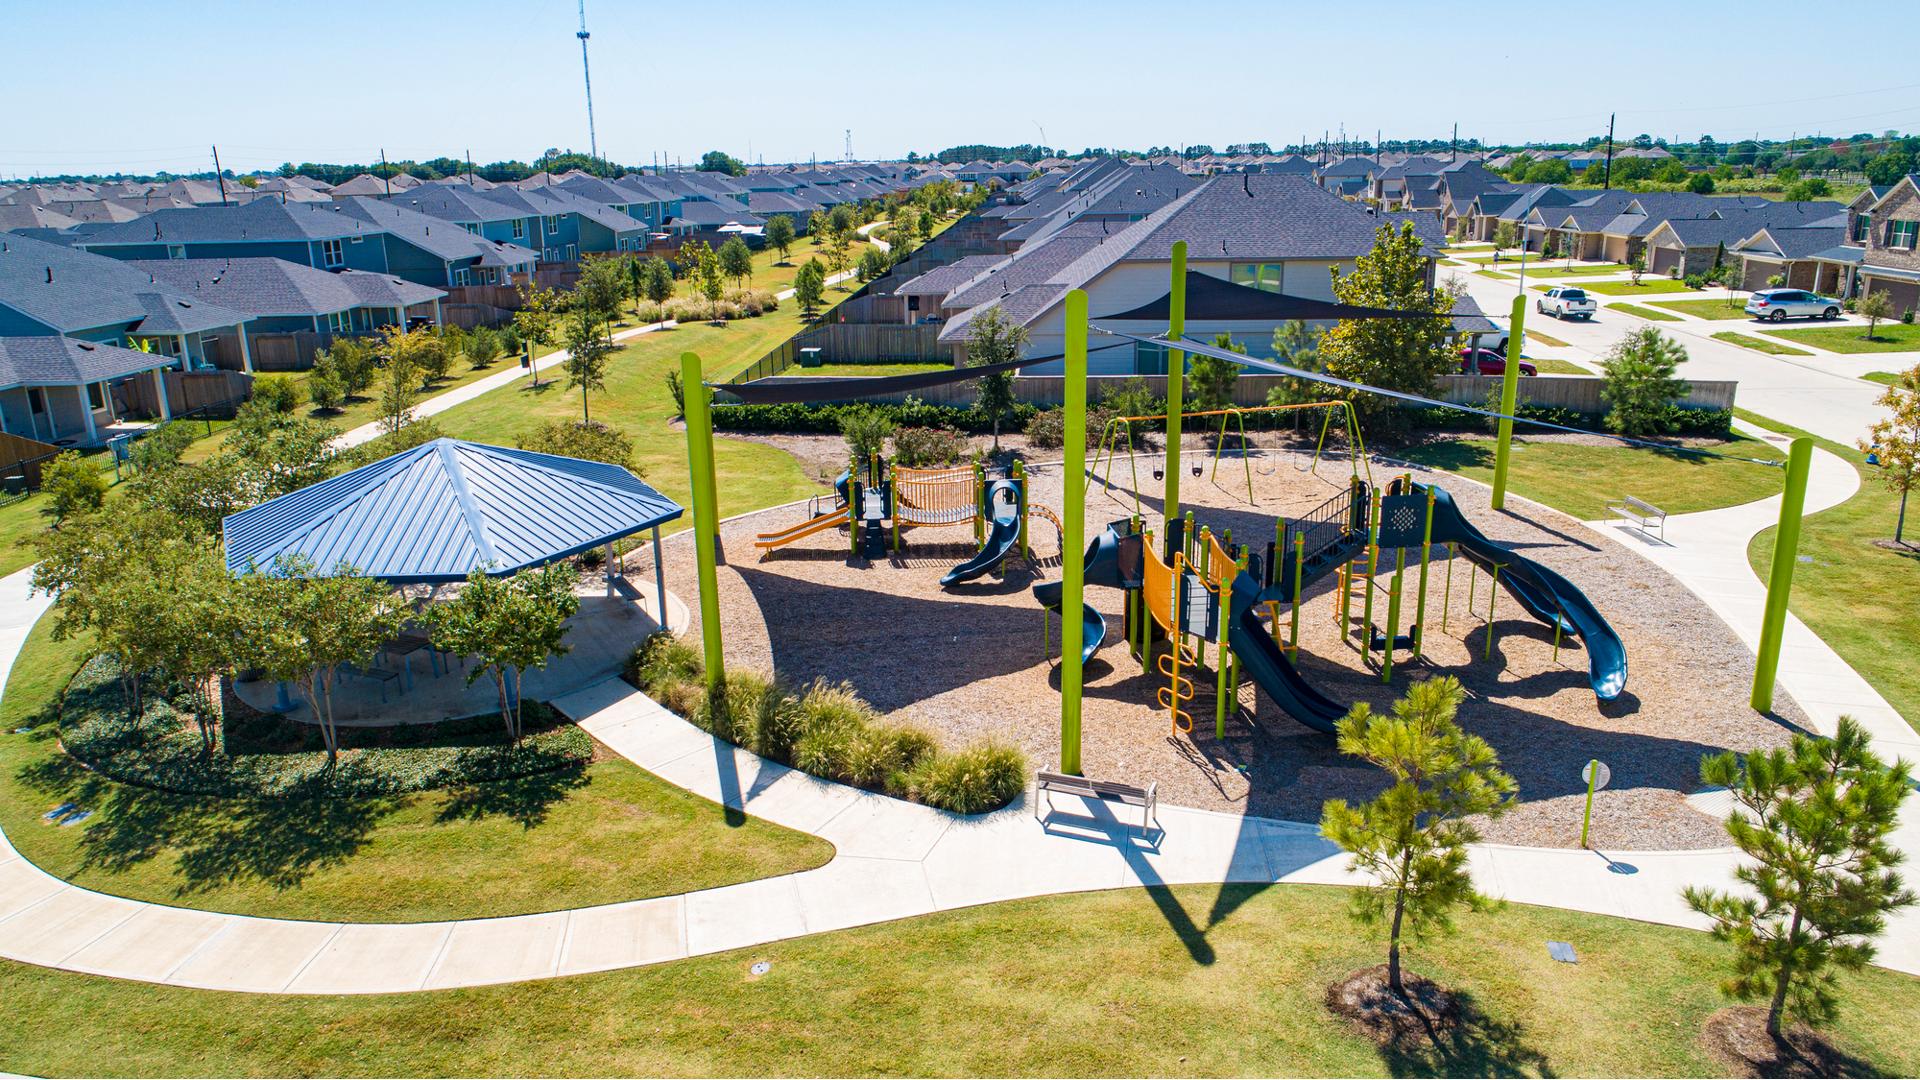 A park set in a neighborhood development has large triangular navy sail shades above two separate play structures with a pavilion nearby with picnic tables.